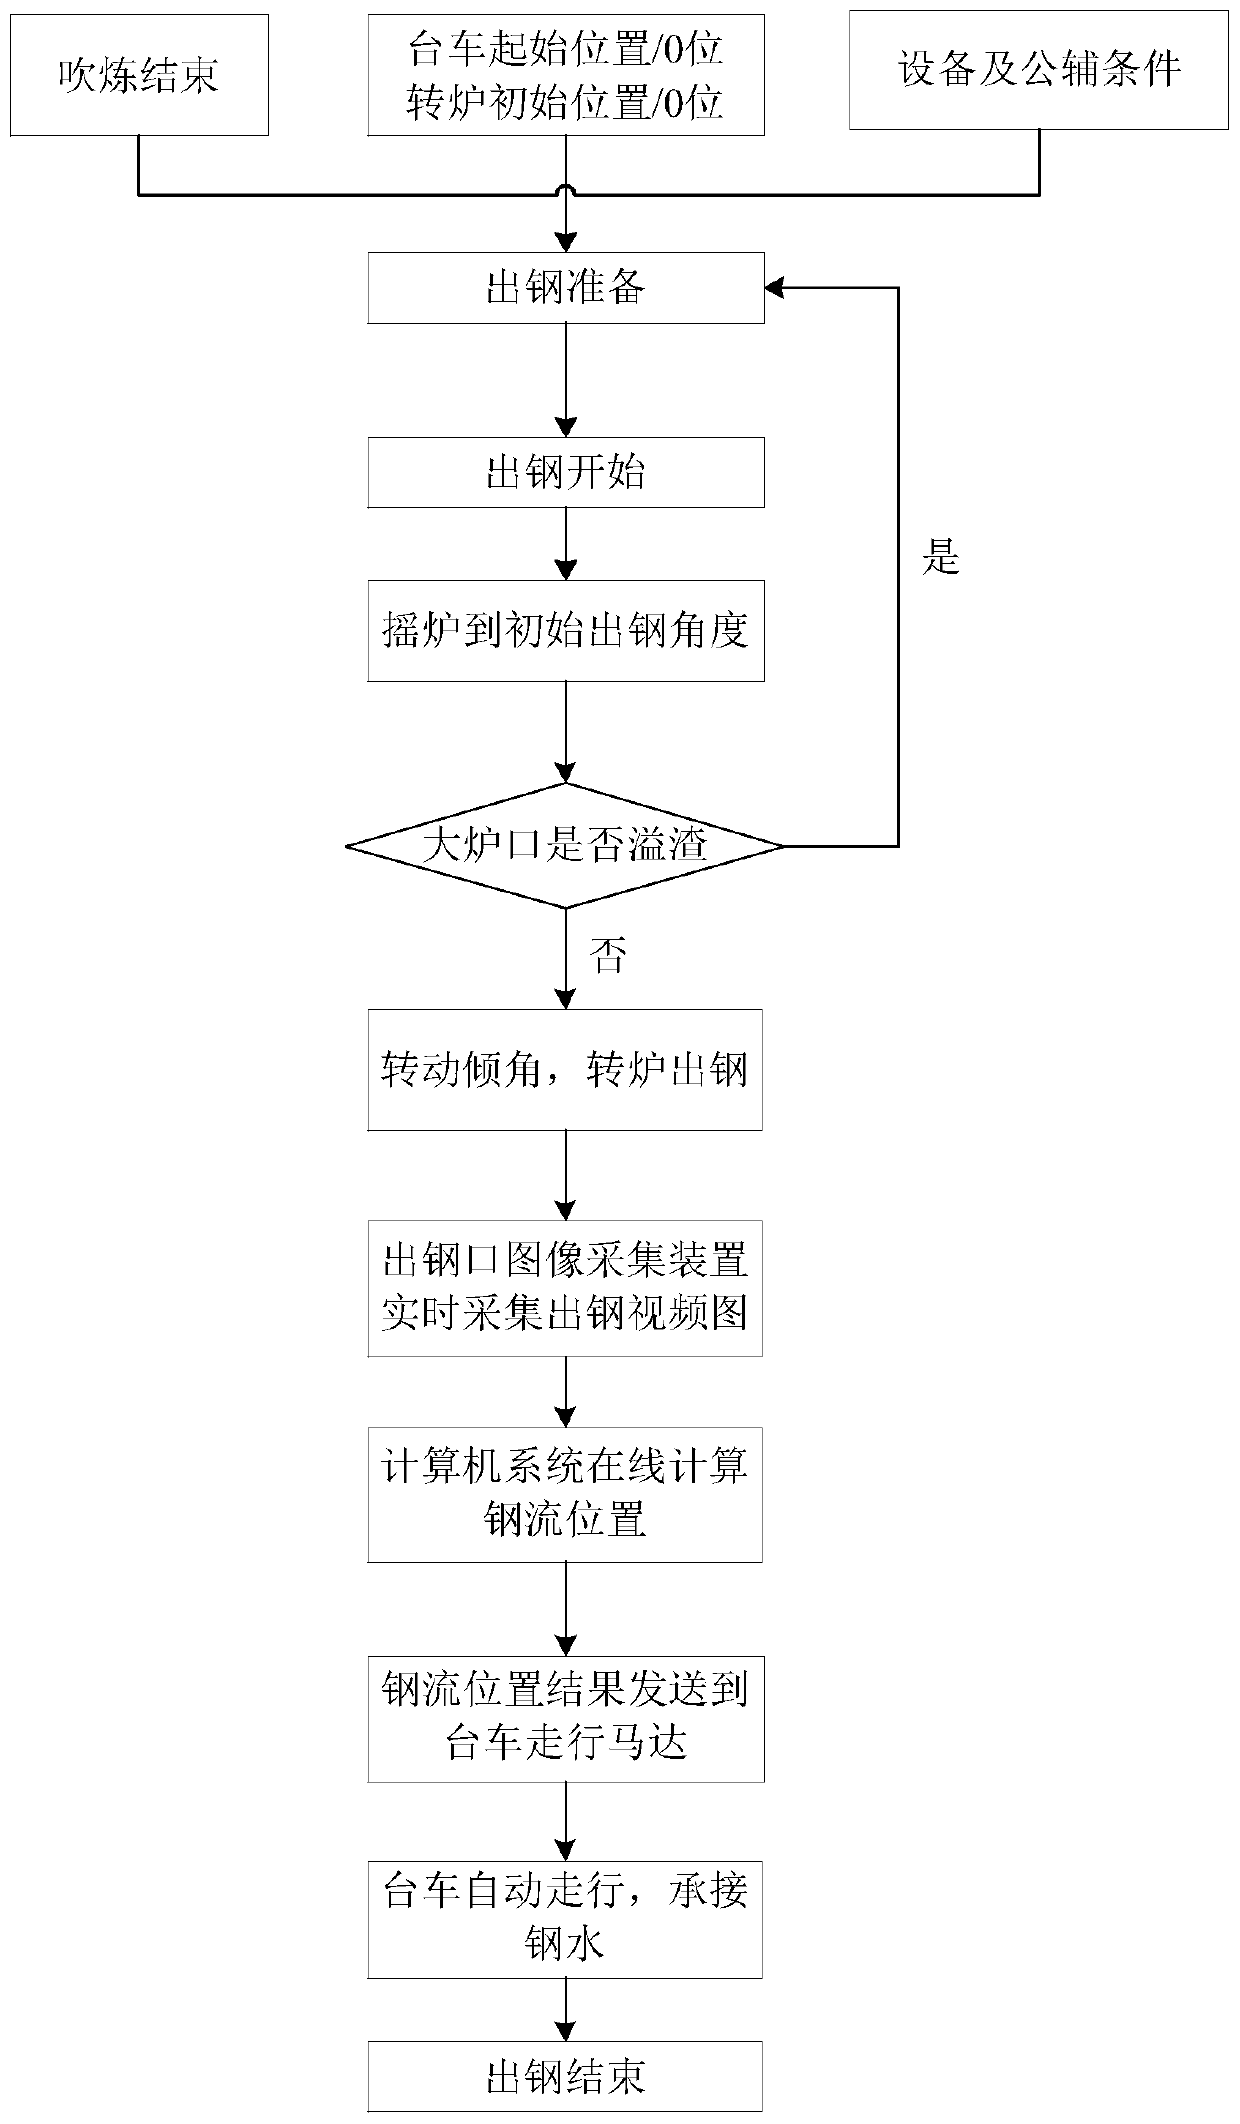 Trolley automatic traveling method and system during converter tapping